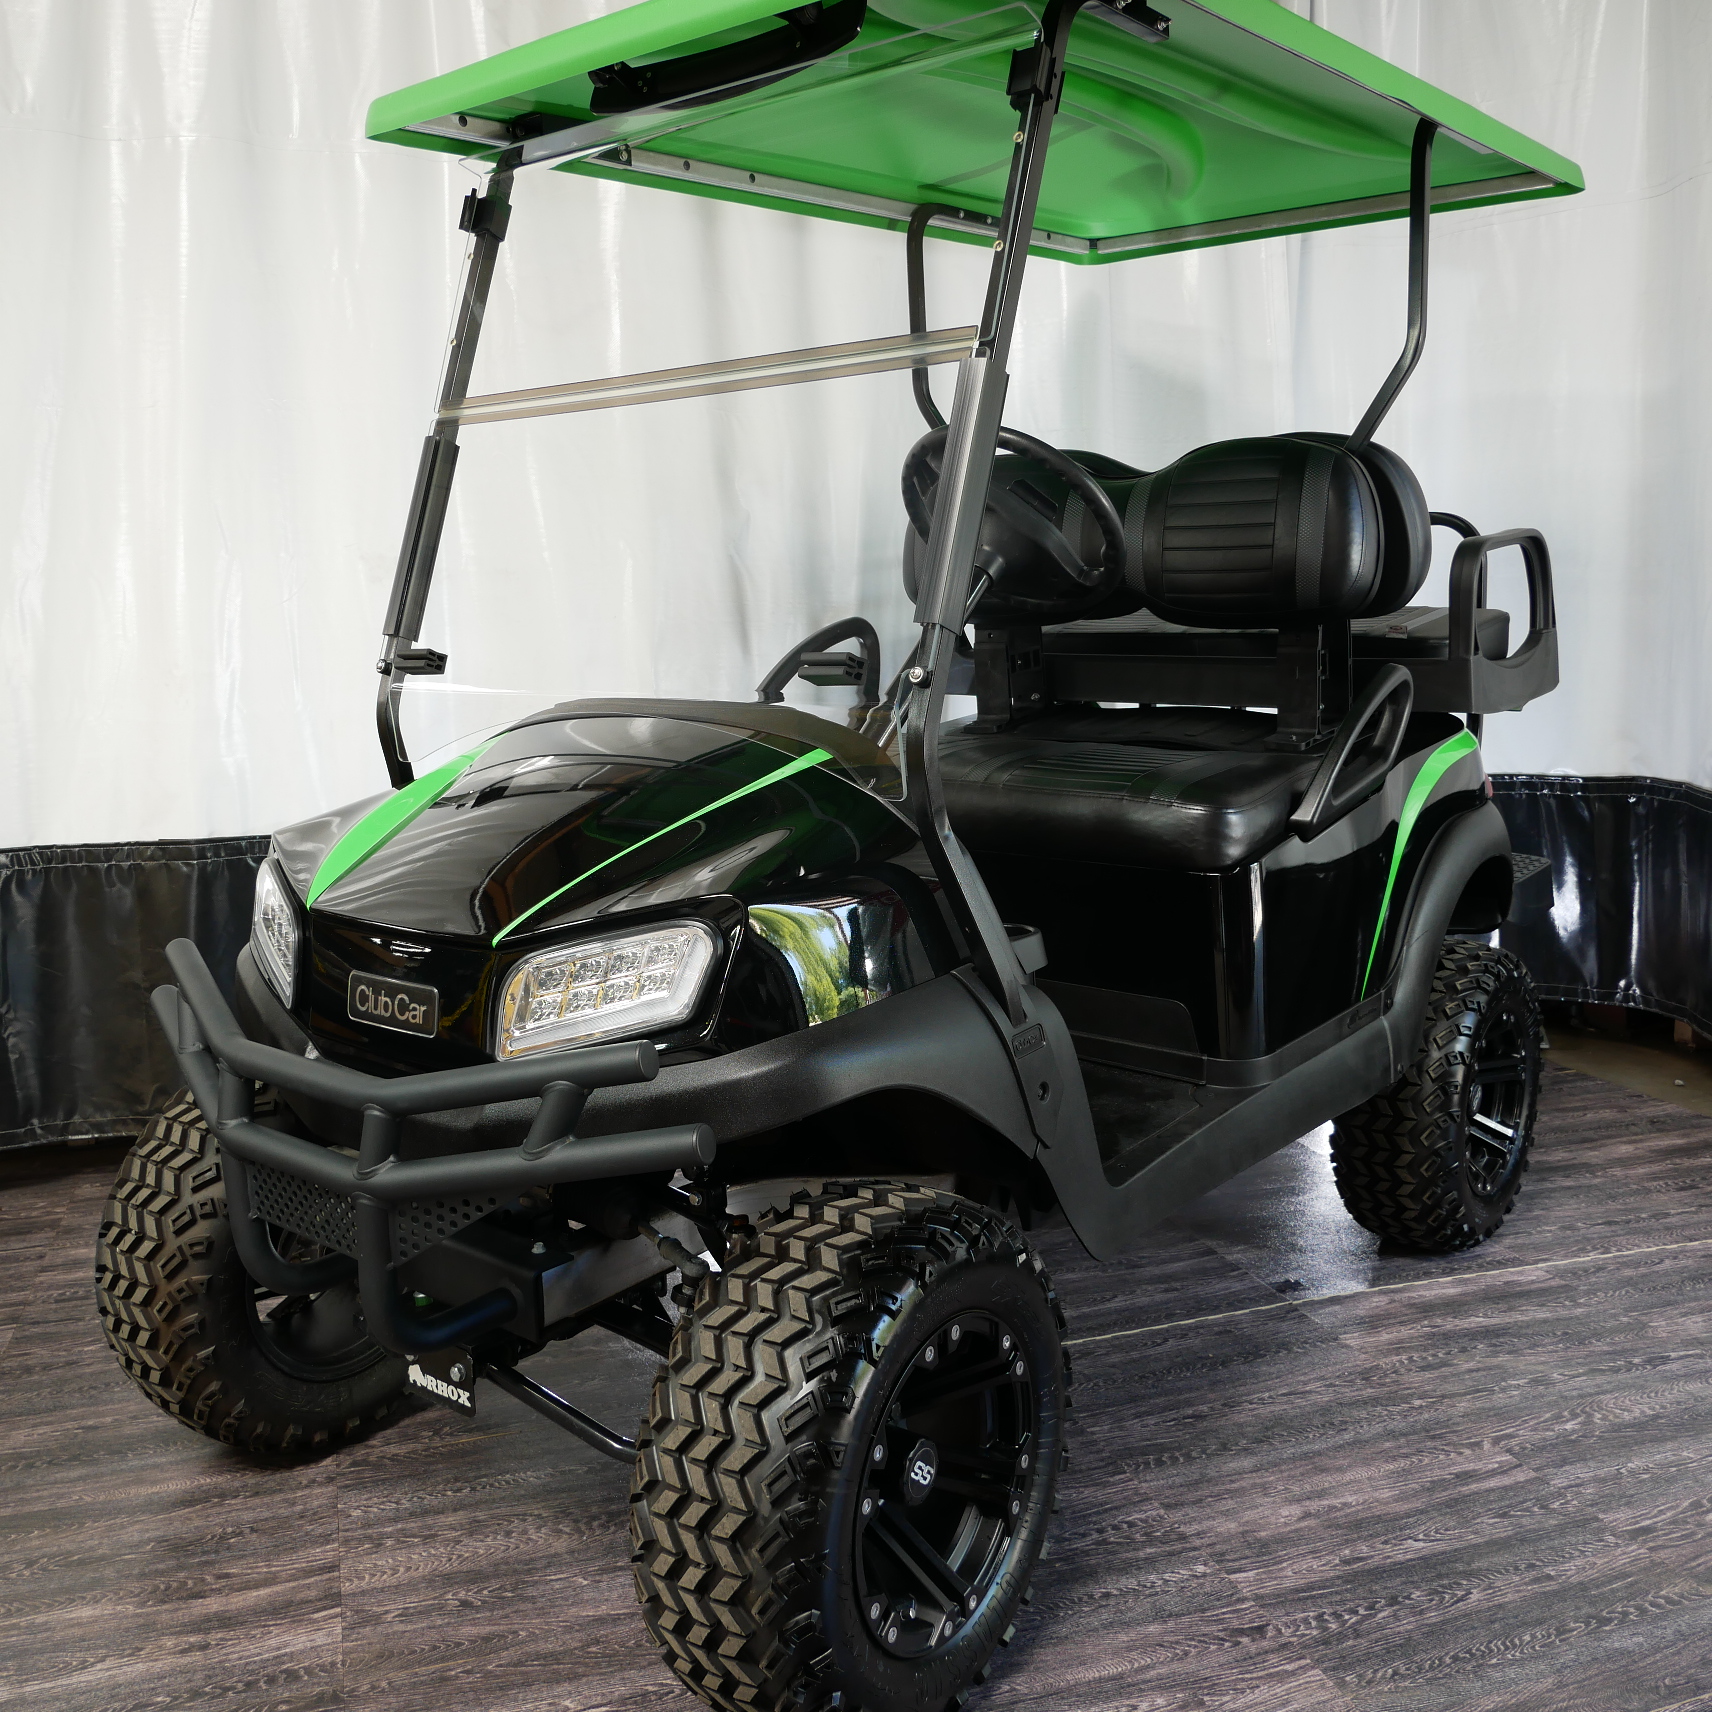 View Our Inventory Online - Golf Carts For Sale With Carolina Golf Cars